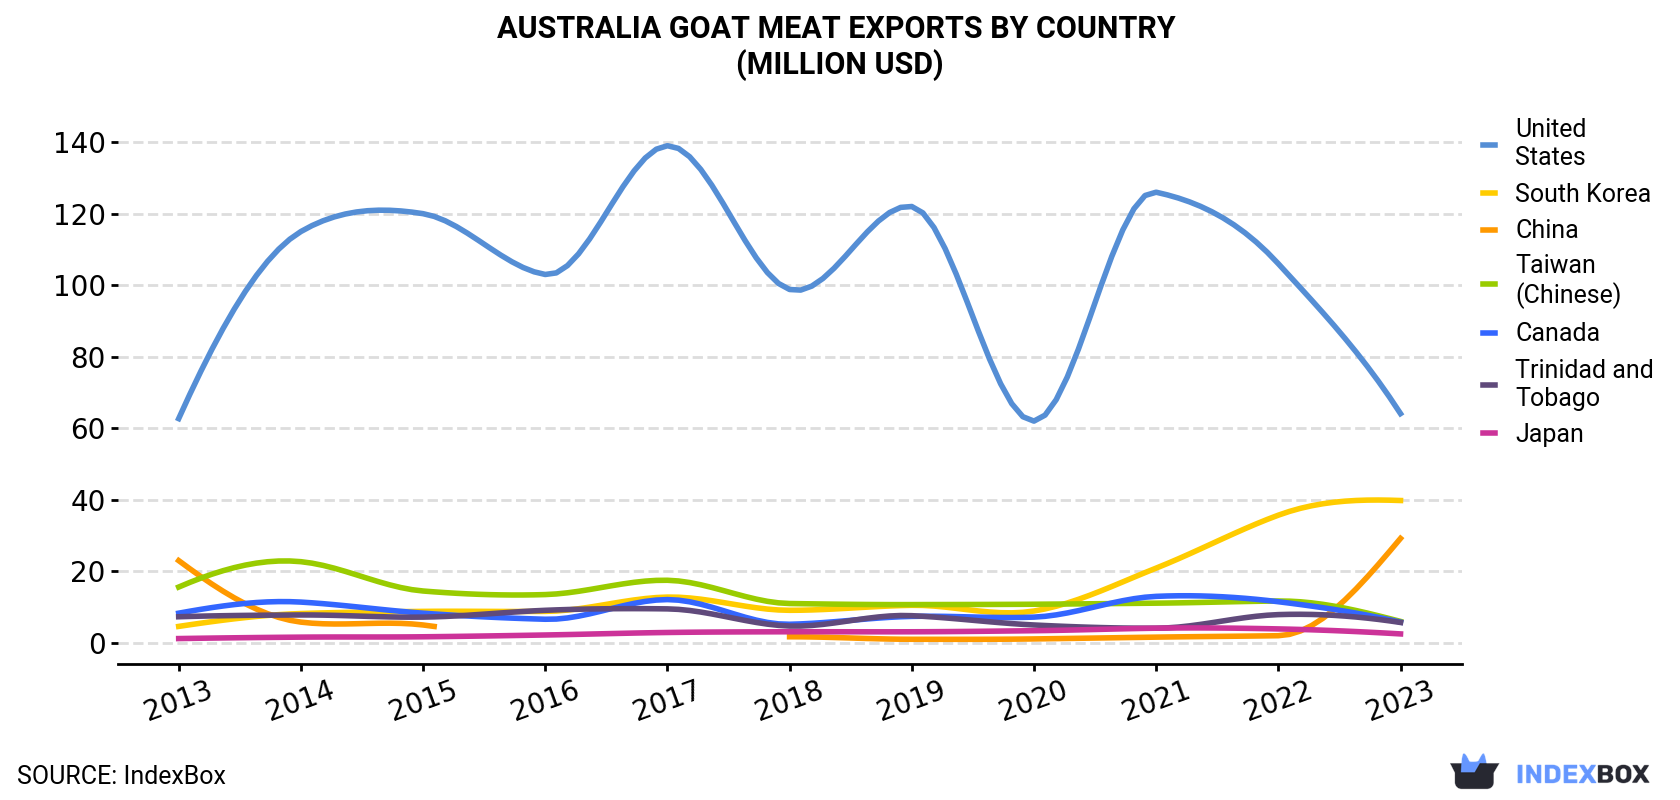 Australia Goat Meat Exports By Country (Million USD)